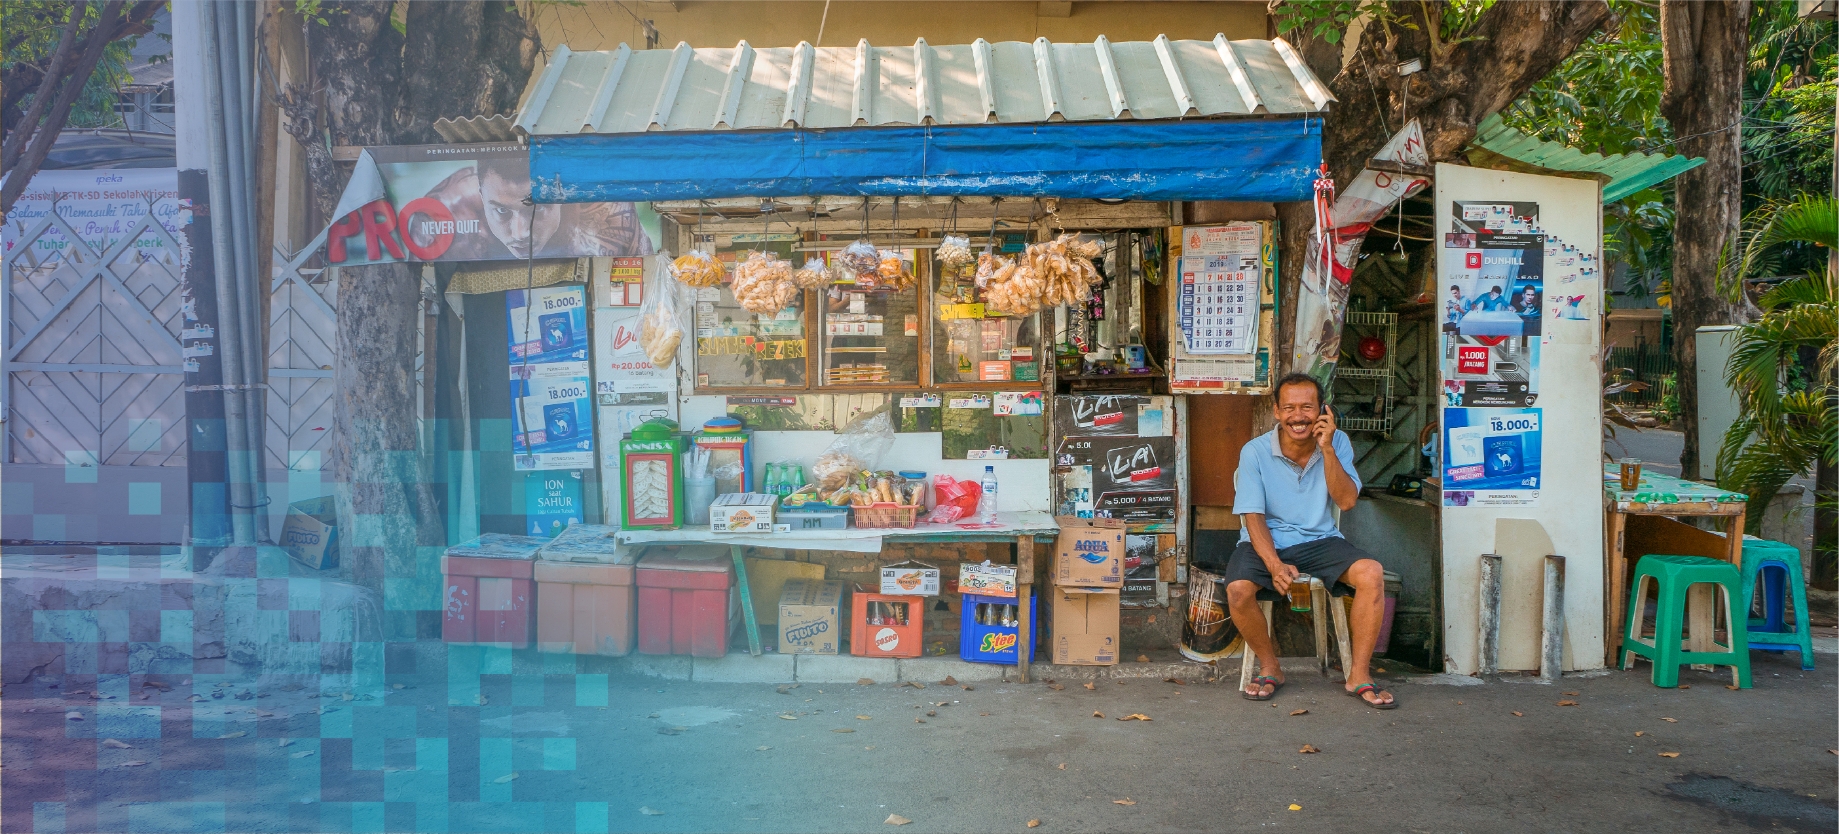 shopkeeper sitting in front of store